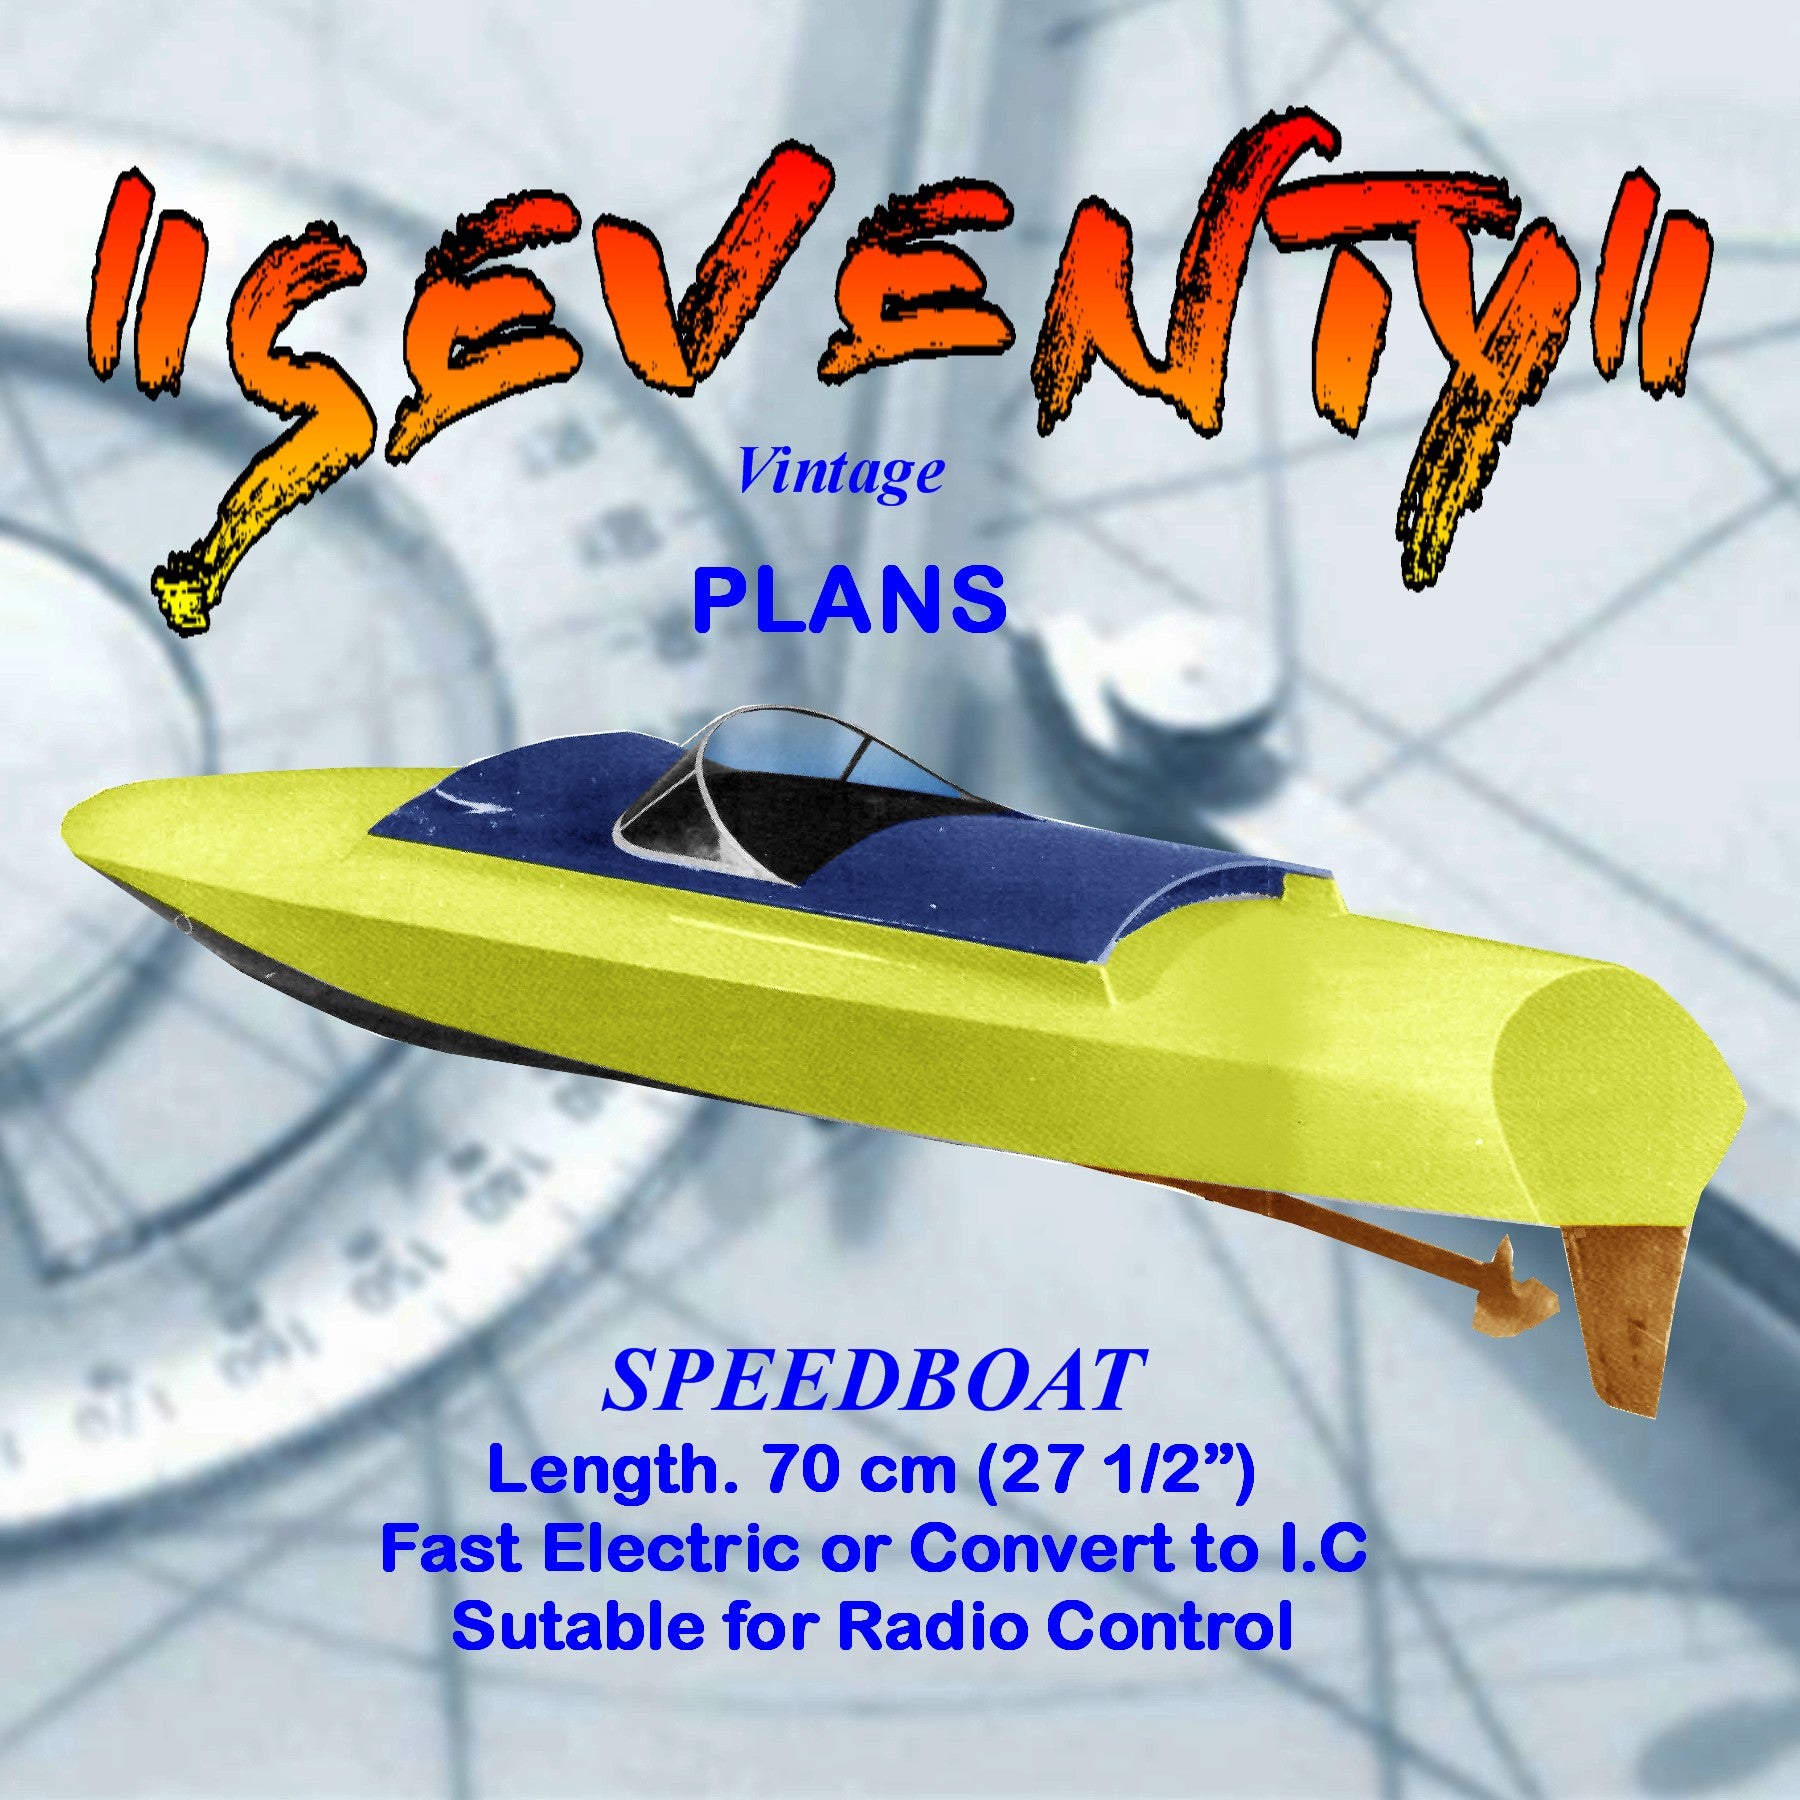 full size printed plans fast electric speedboat “seventy” suitable for radio control